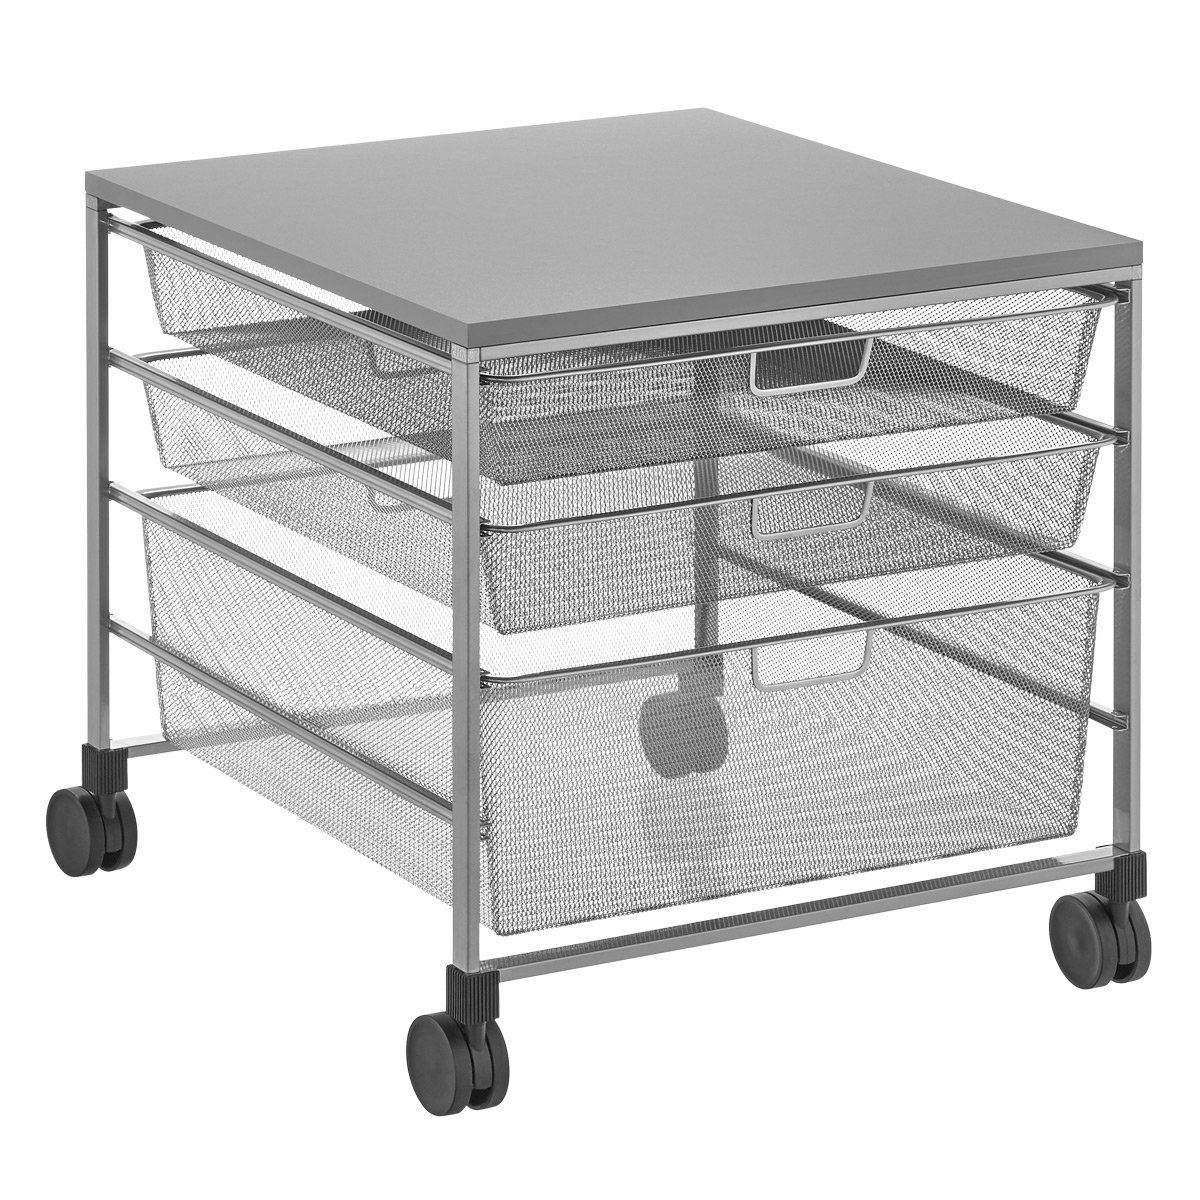 Elfa Mesh Rolling Cart with Drawers | The Container Store